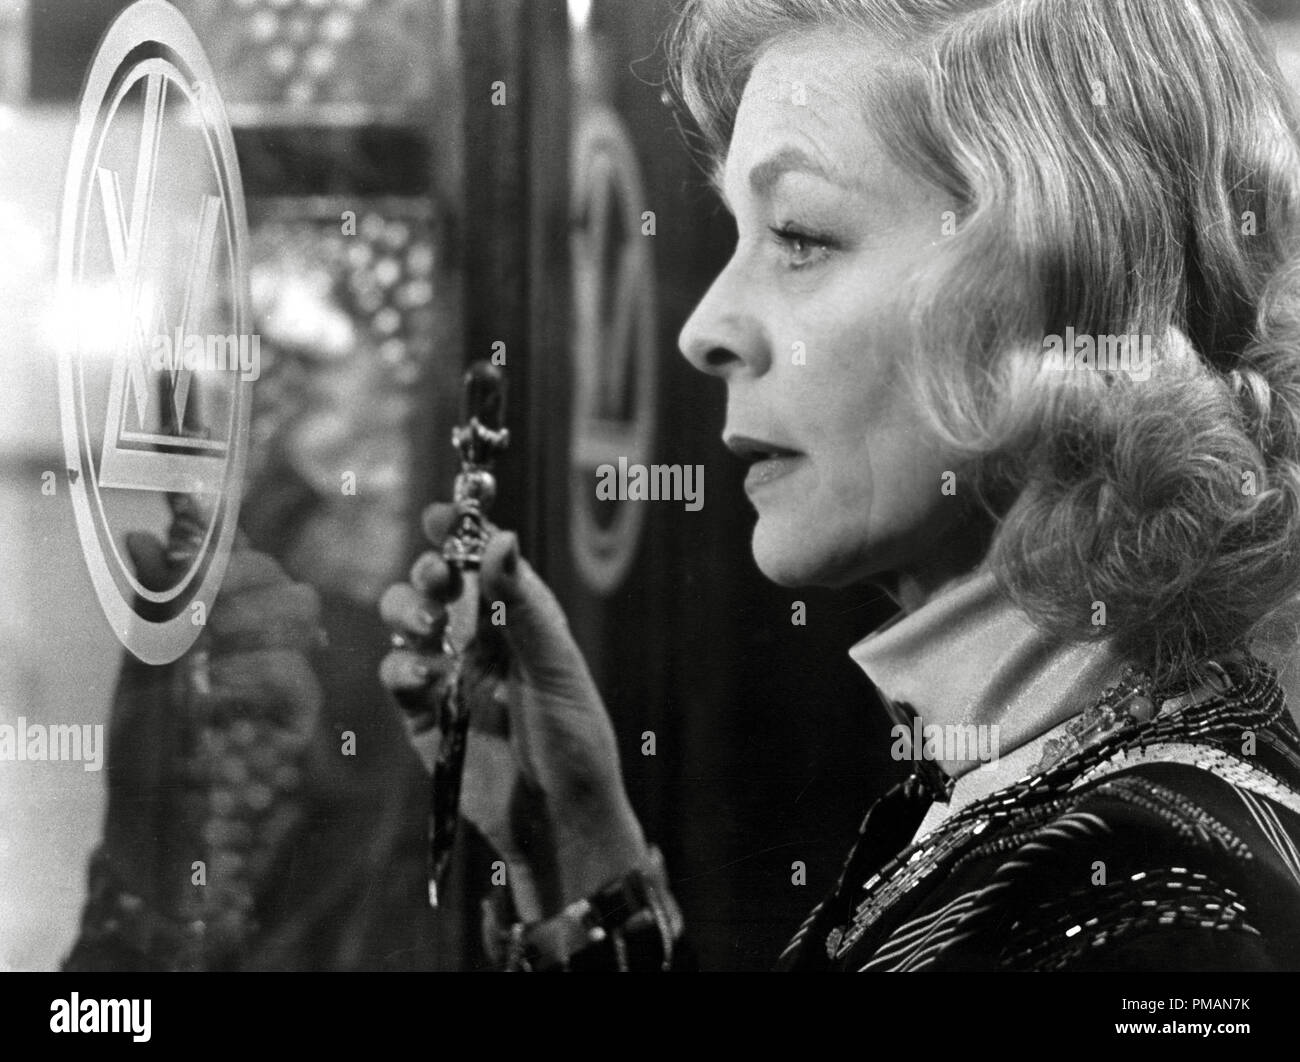 Film Still/Publicity Still of 'Murder on the Orient Express' Lauren Bacall 1974 Paramount Cinema Publishers Collection - No Release - For Editorial Use Only.    File Reference # 33505 393THA Stock Photo